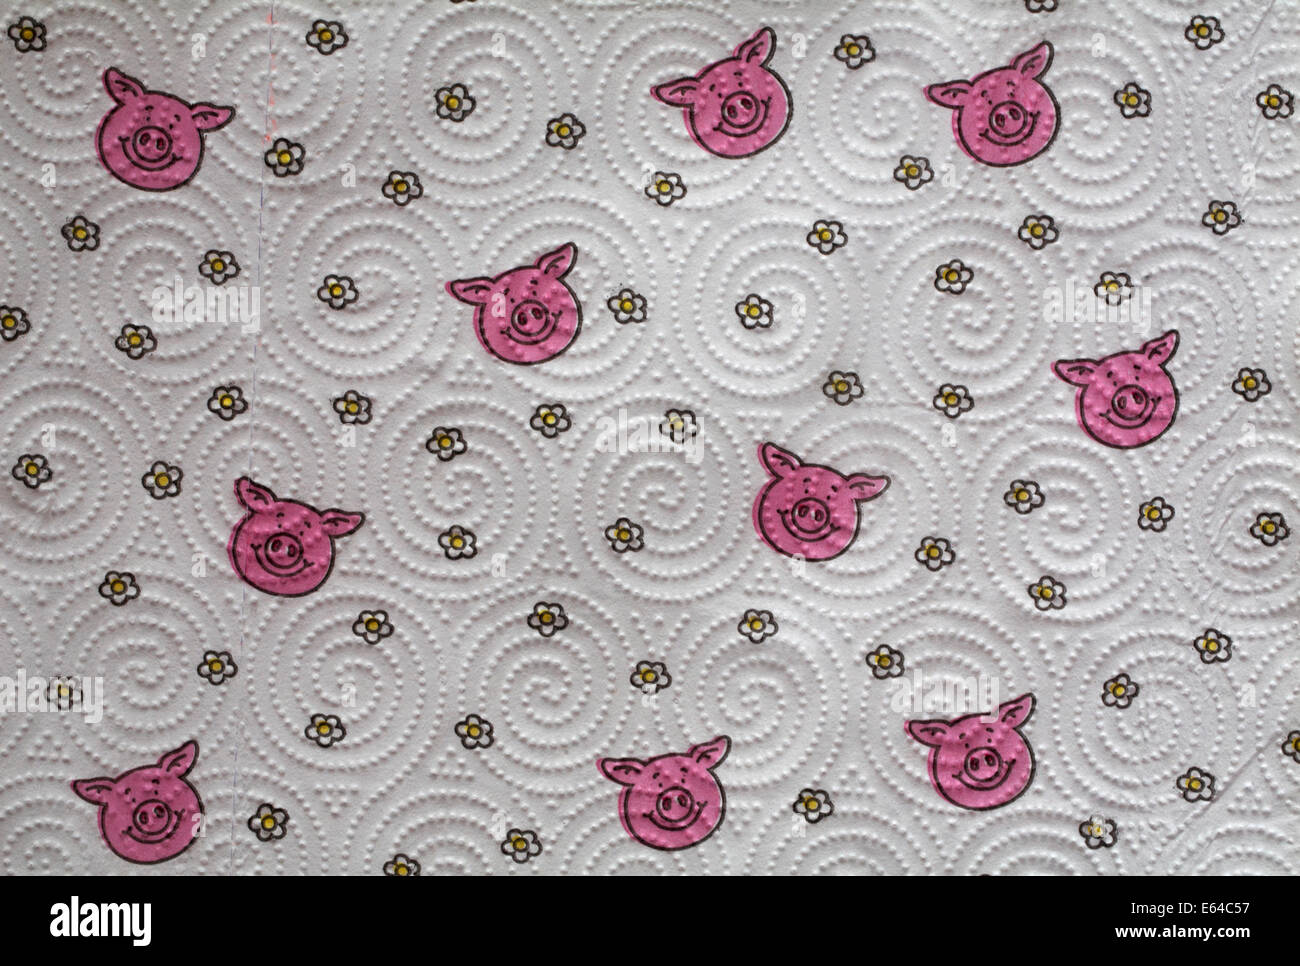 close up detail of Marks & Spencer percy pig ultra household towels 3-ply Stock Photo